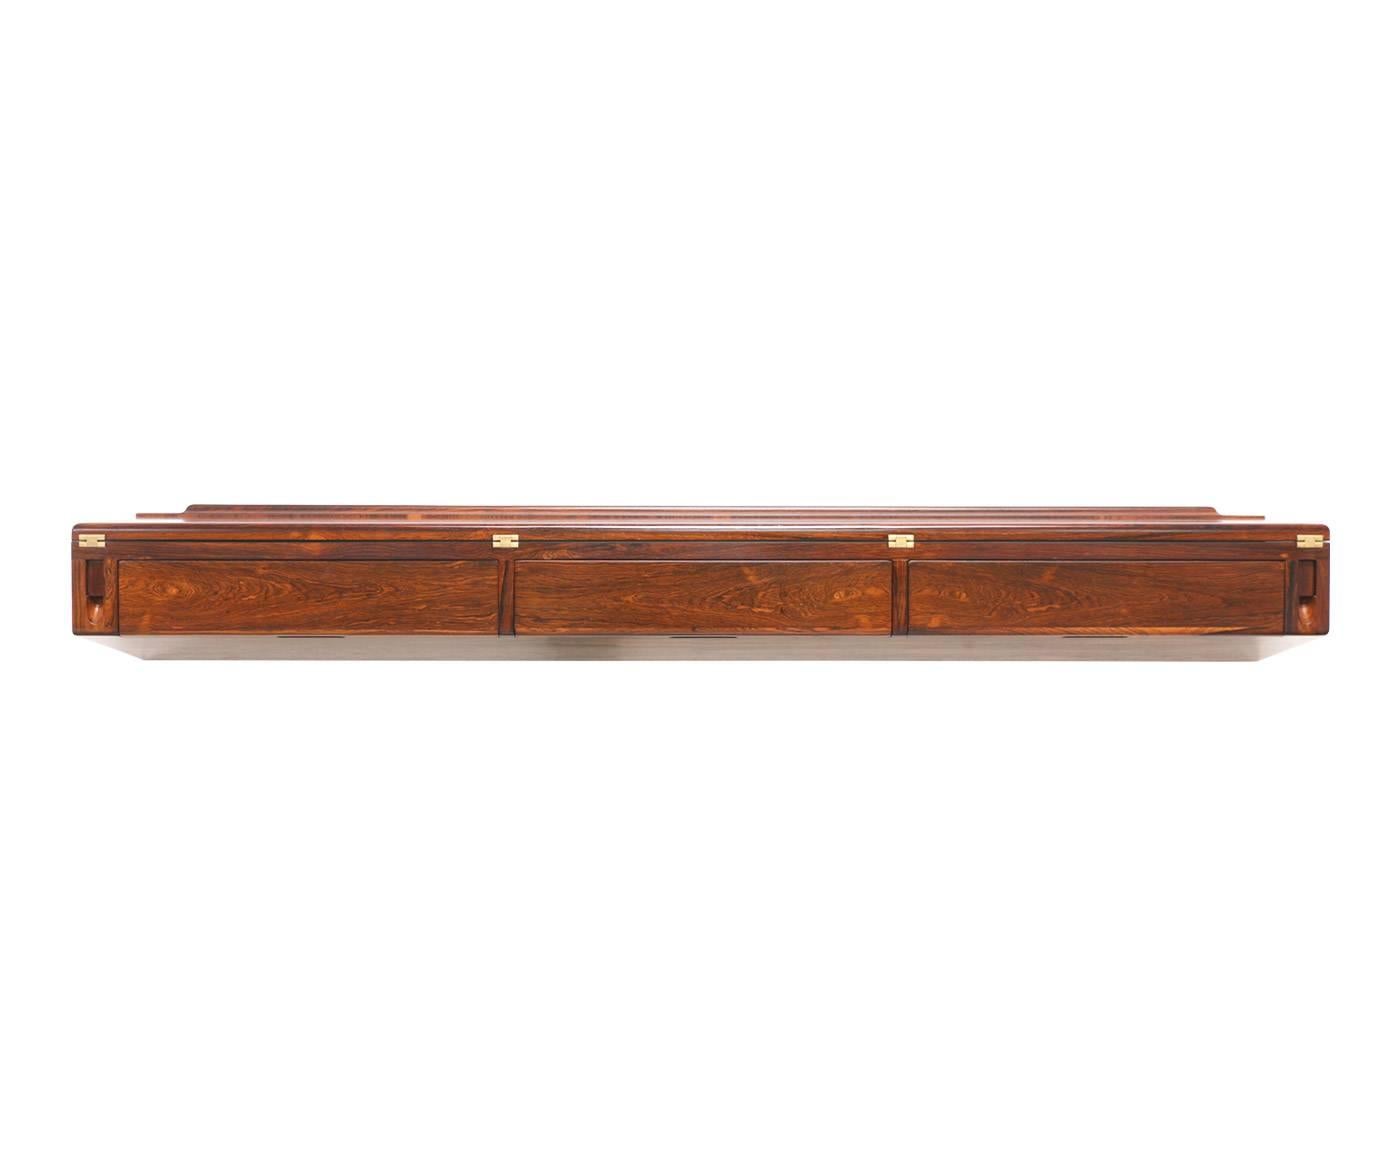 Designer: Arne Hovmand-Olsen.
Manufacturer: Arne Hovmand-Olsen.
Period/Style: Danish modern.
Country: Denmark,
Date: 1960s.

Dimensions: 7.75″ H x 59″ W x 12″ D.
Total extension 11″.
Materials: Rosewood, brass.
Condition: Excellent, newly